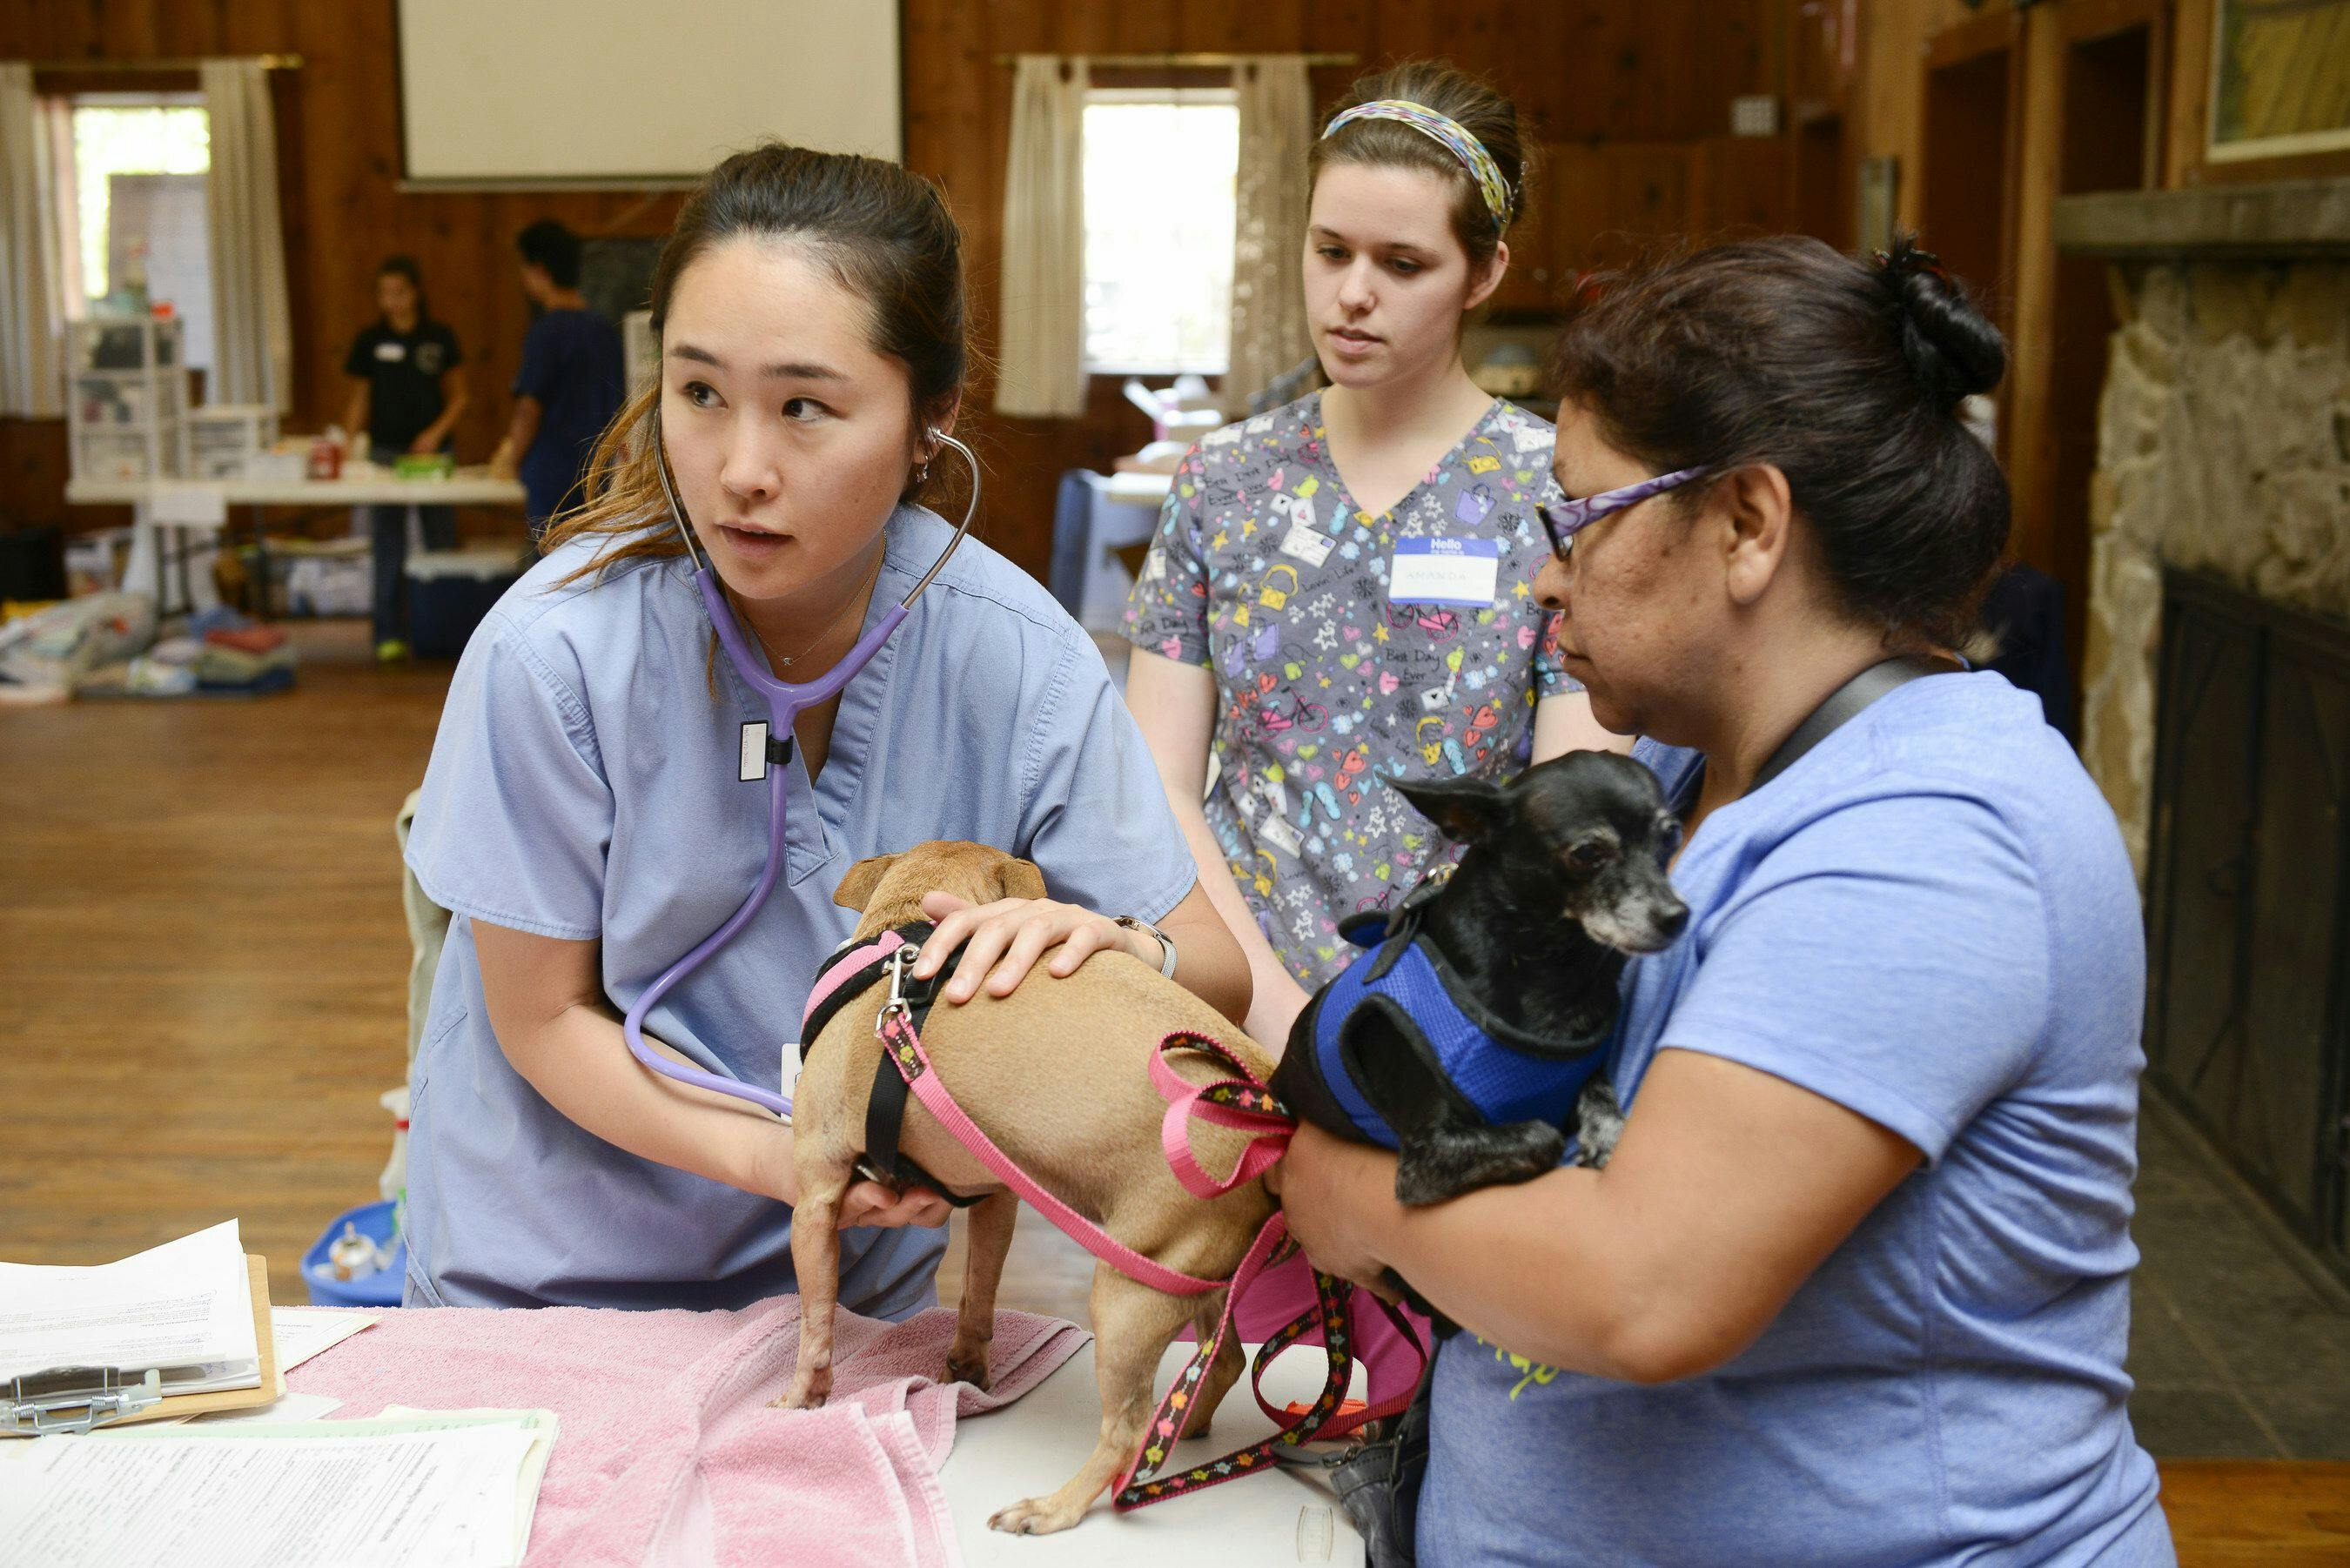 Three UC Davis personnel associated with the Knights Landing One Health Center provide complimentary veterinary care to a community member’s dogs. (Photo credit: UC Davis)